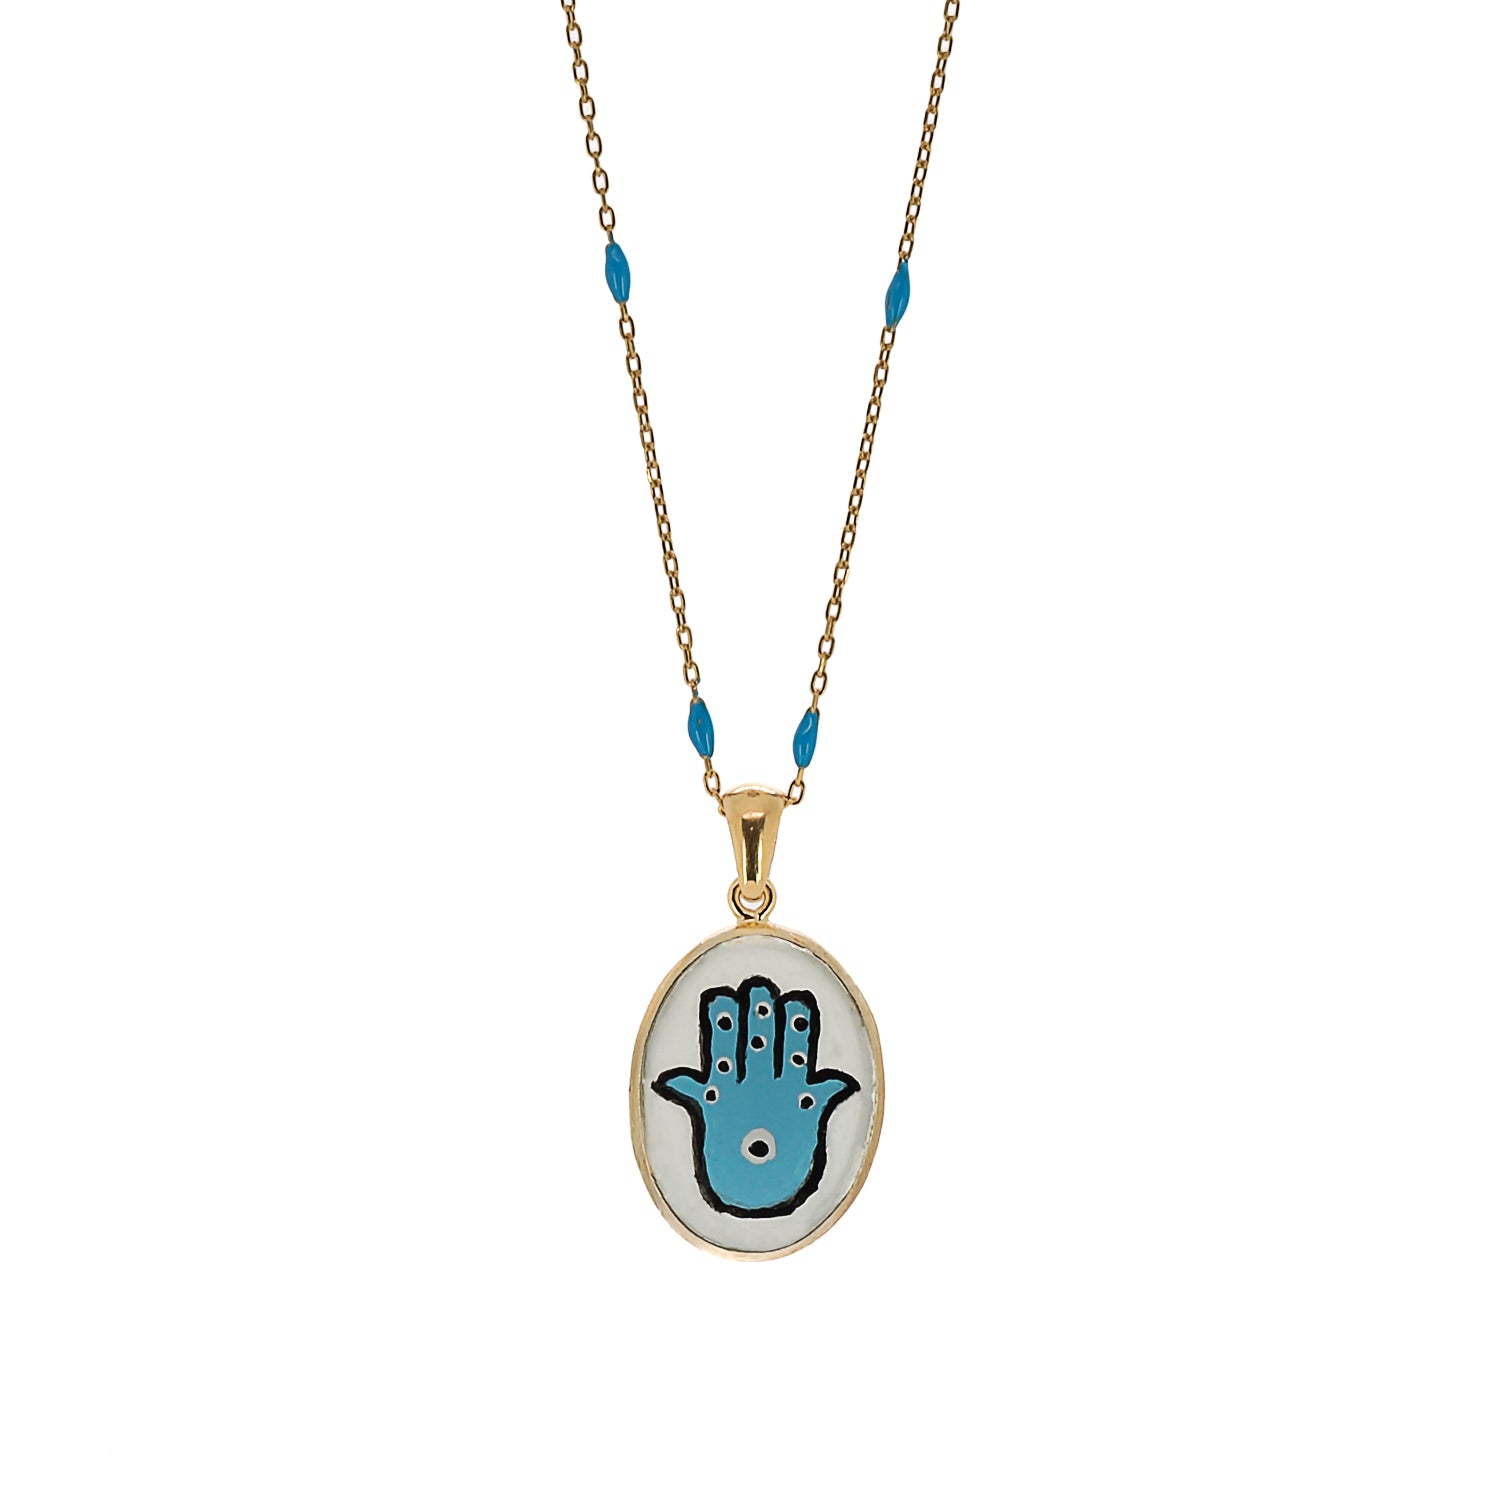 Sterling Silver Hamsa Hand Necklace with Turquoise Enamel - A Symbol of Protection and Meaning.